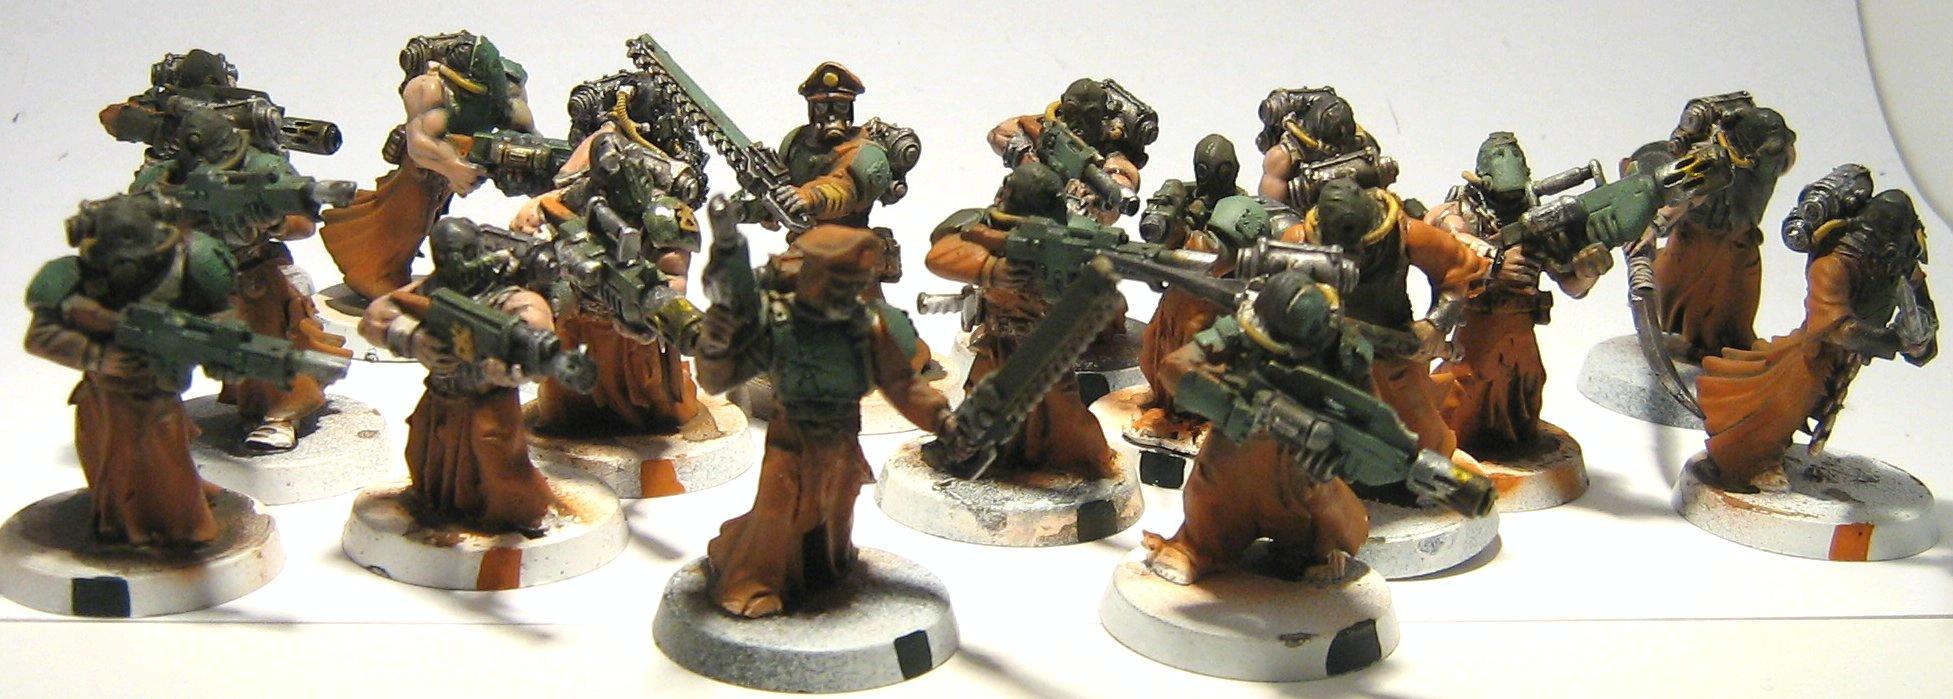 Veterans, retouched with airbrush